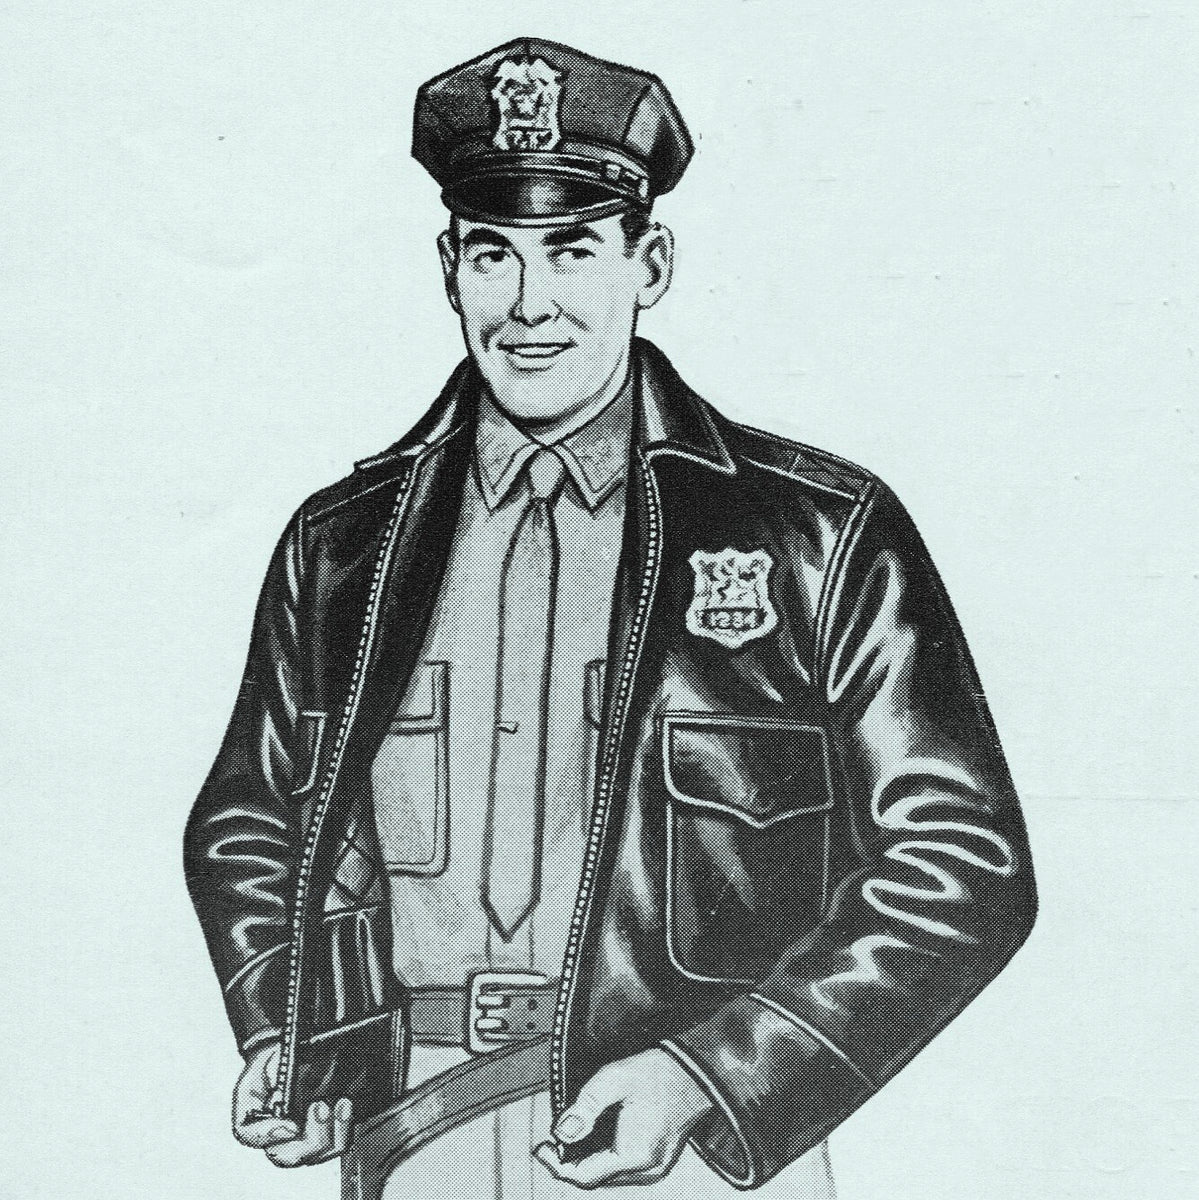 Boston Cowhide Leather Mid Length Police Jacket – Taylor's Leatherwear, Inc.